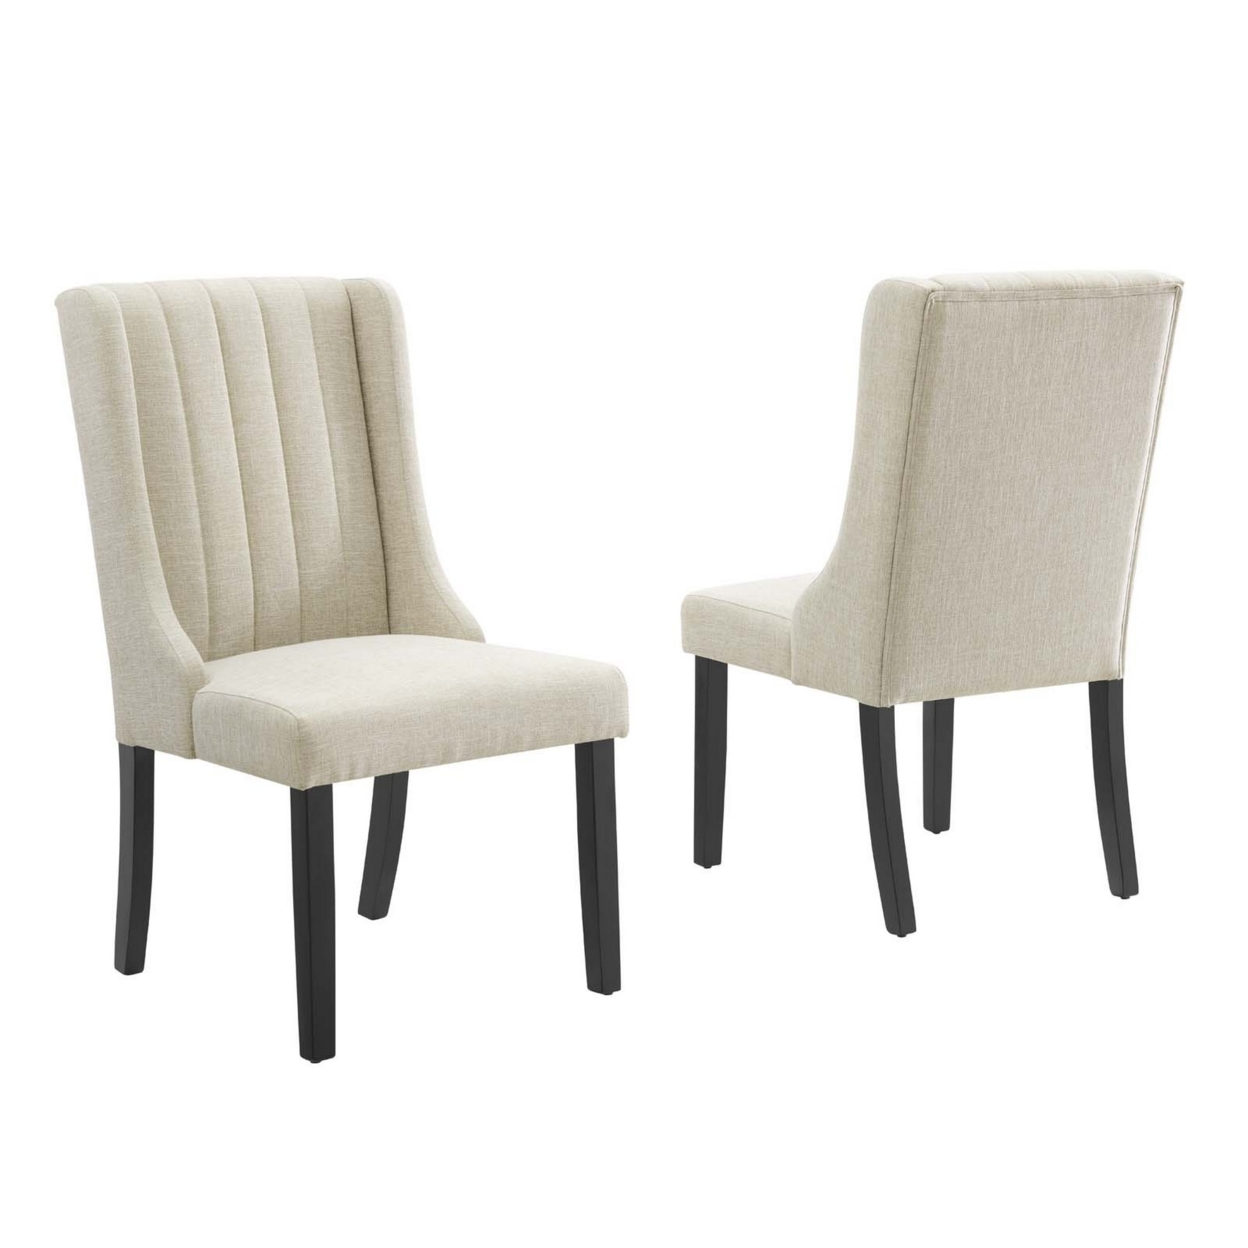 Renew Parsons Fabric Dining Side Chairs - Set Of 2, Beige